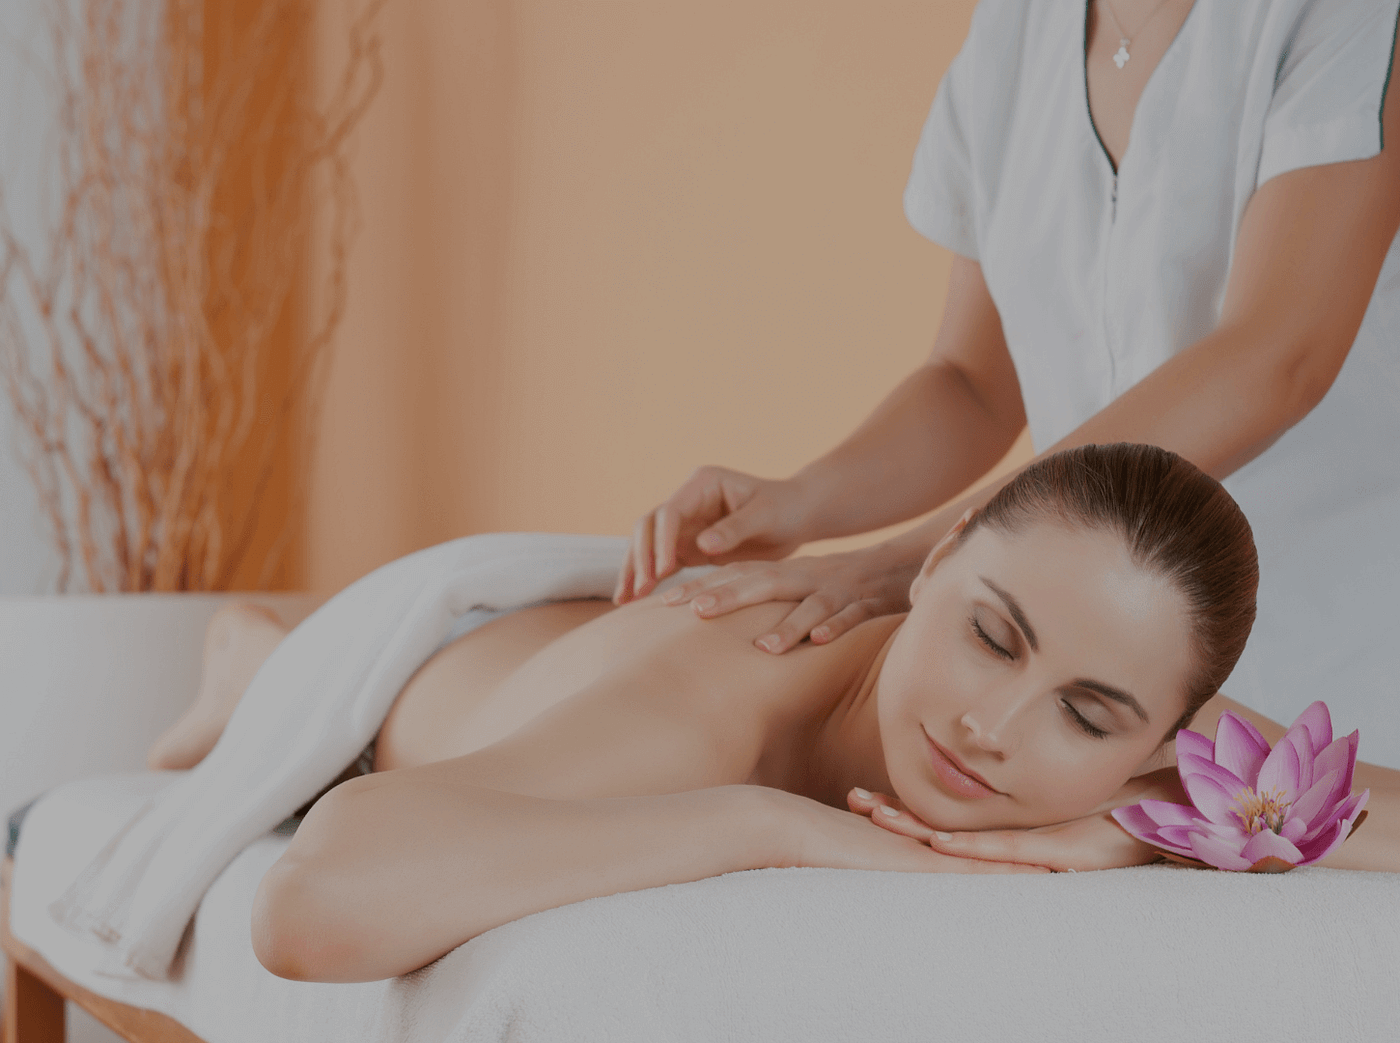 Exploring the Artistry and Benefits of Body-to-Body Massage”